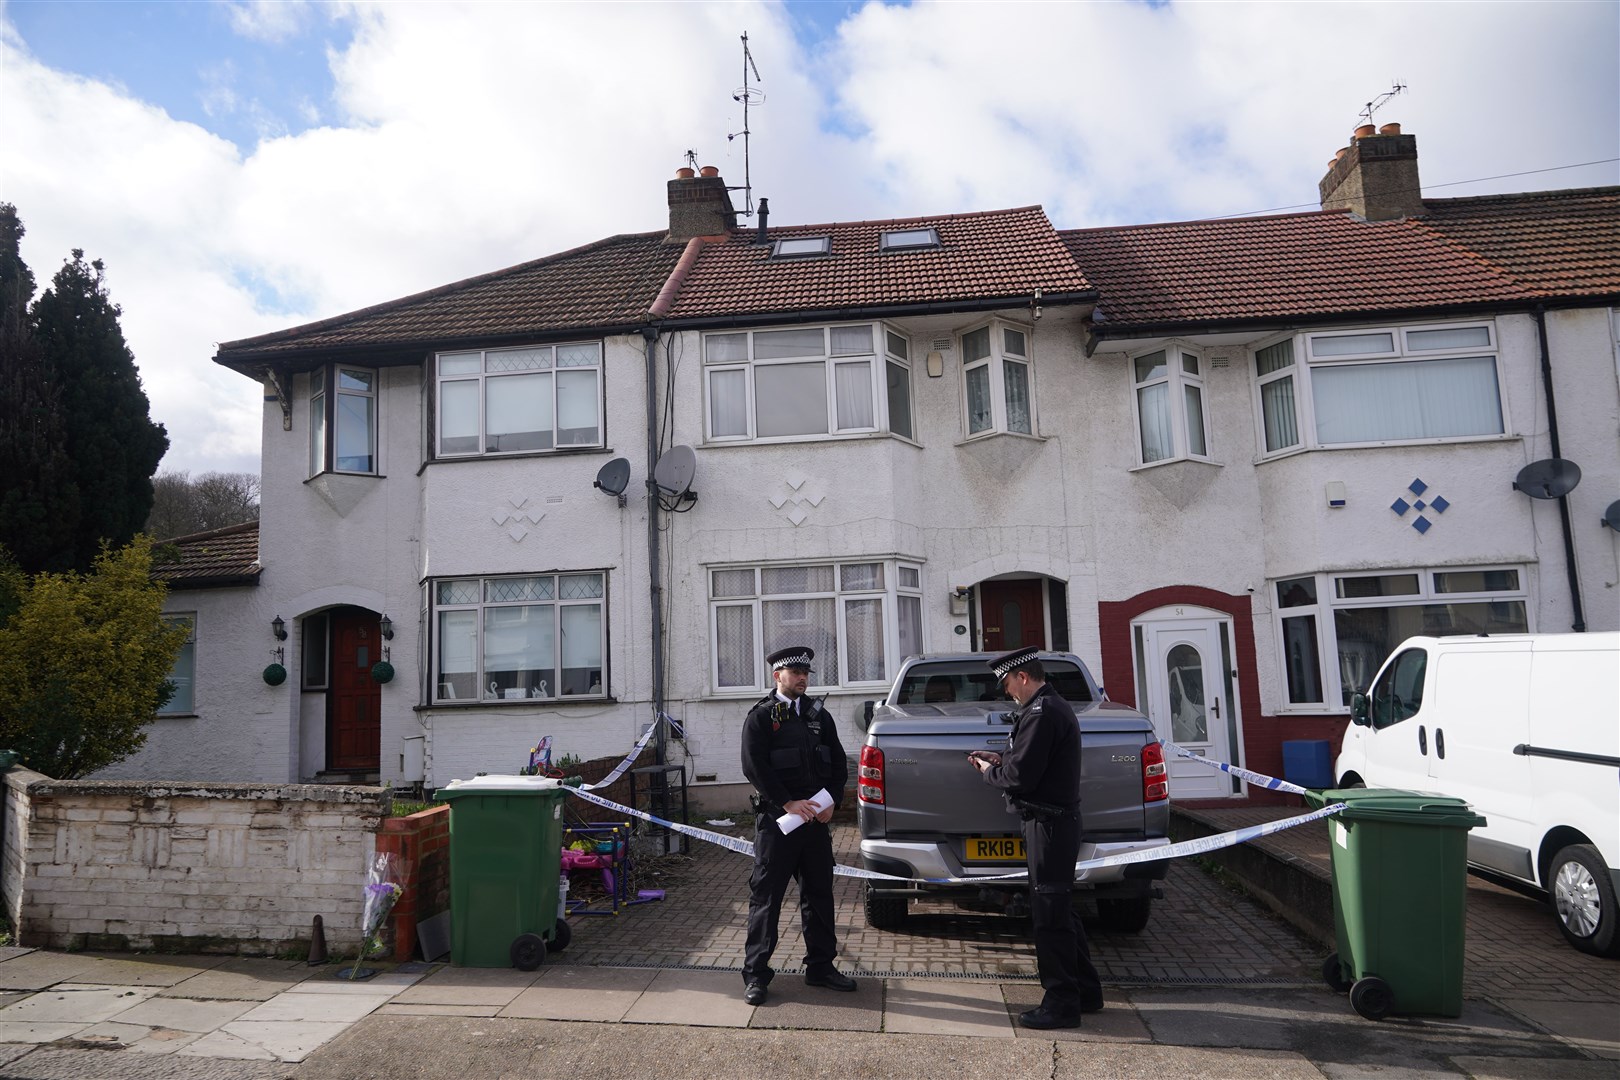 Police officers stand outside the house where the bodies were found (Yui Mok/PA)